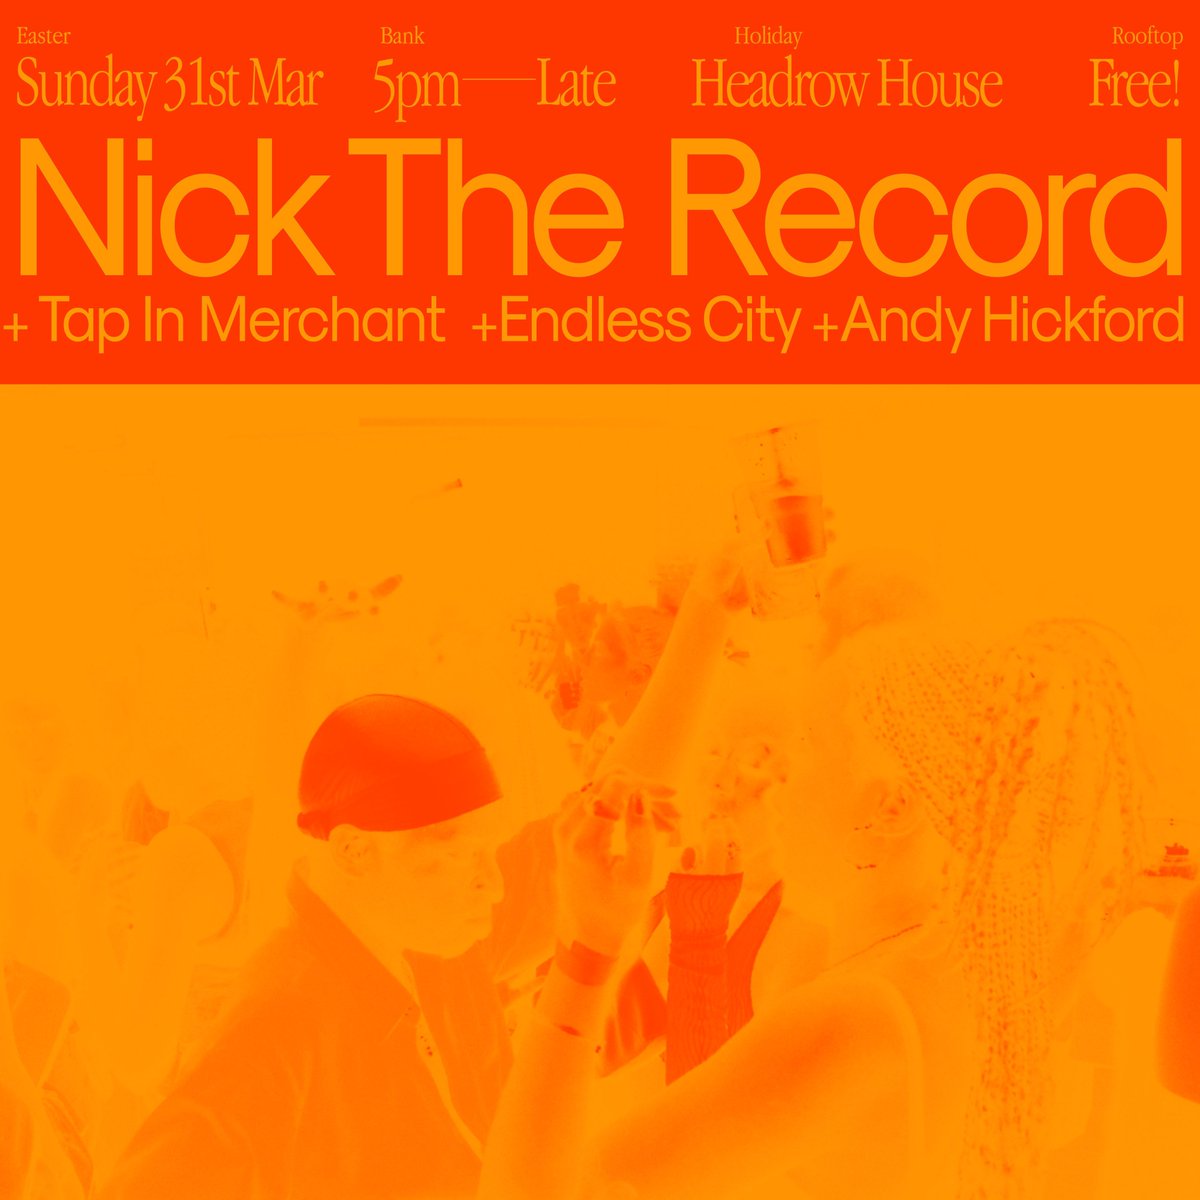 Easter bank hol countdown is well and truly underway! Sunday antics from the very capable hands of Nick the record up on the Headrow House rooftop 👌 PLUS sets from Tap in Merchant, Endless City and Andy Hickford... tickets on @dicefm buff.ly/43uk7Ma